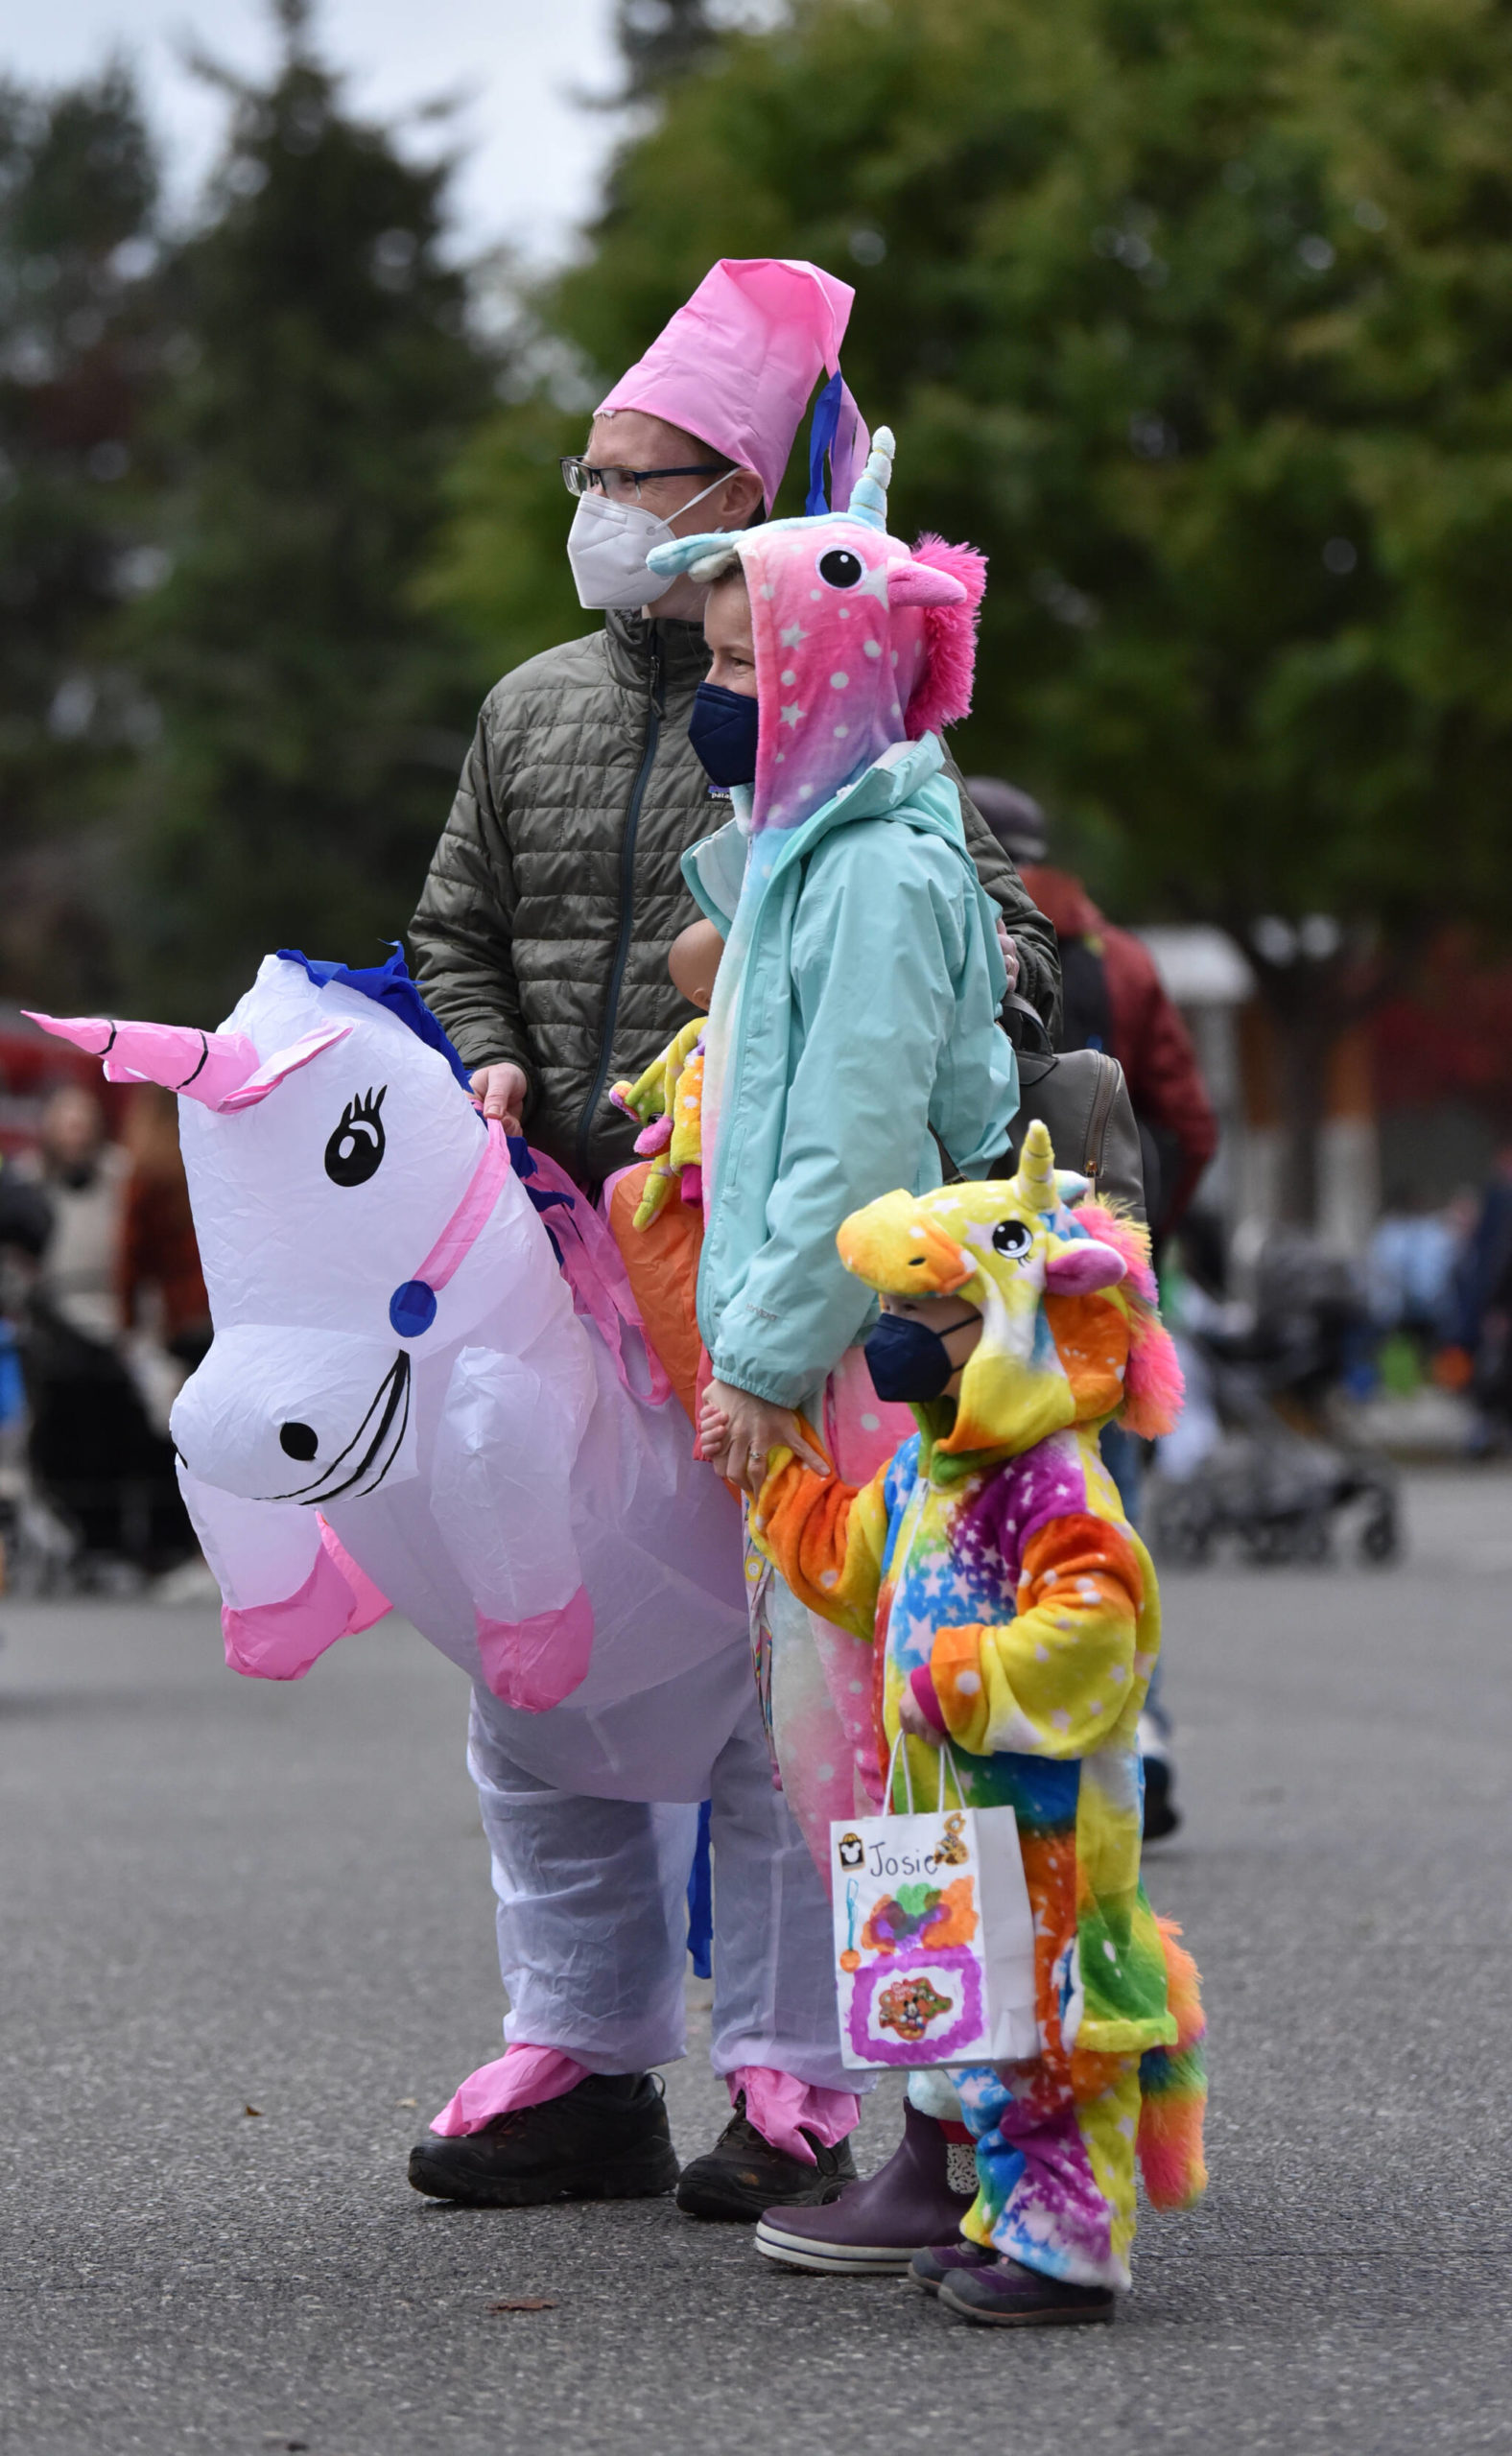 A rare unicorn family is spotted in Winslow on Halloween.